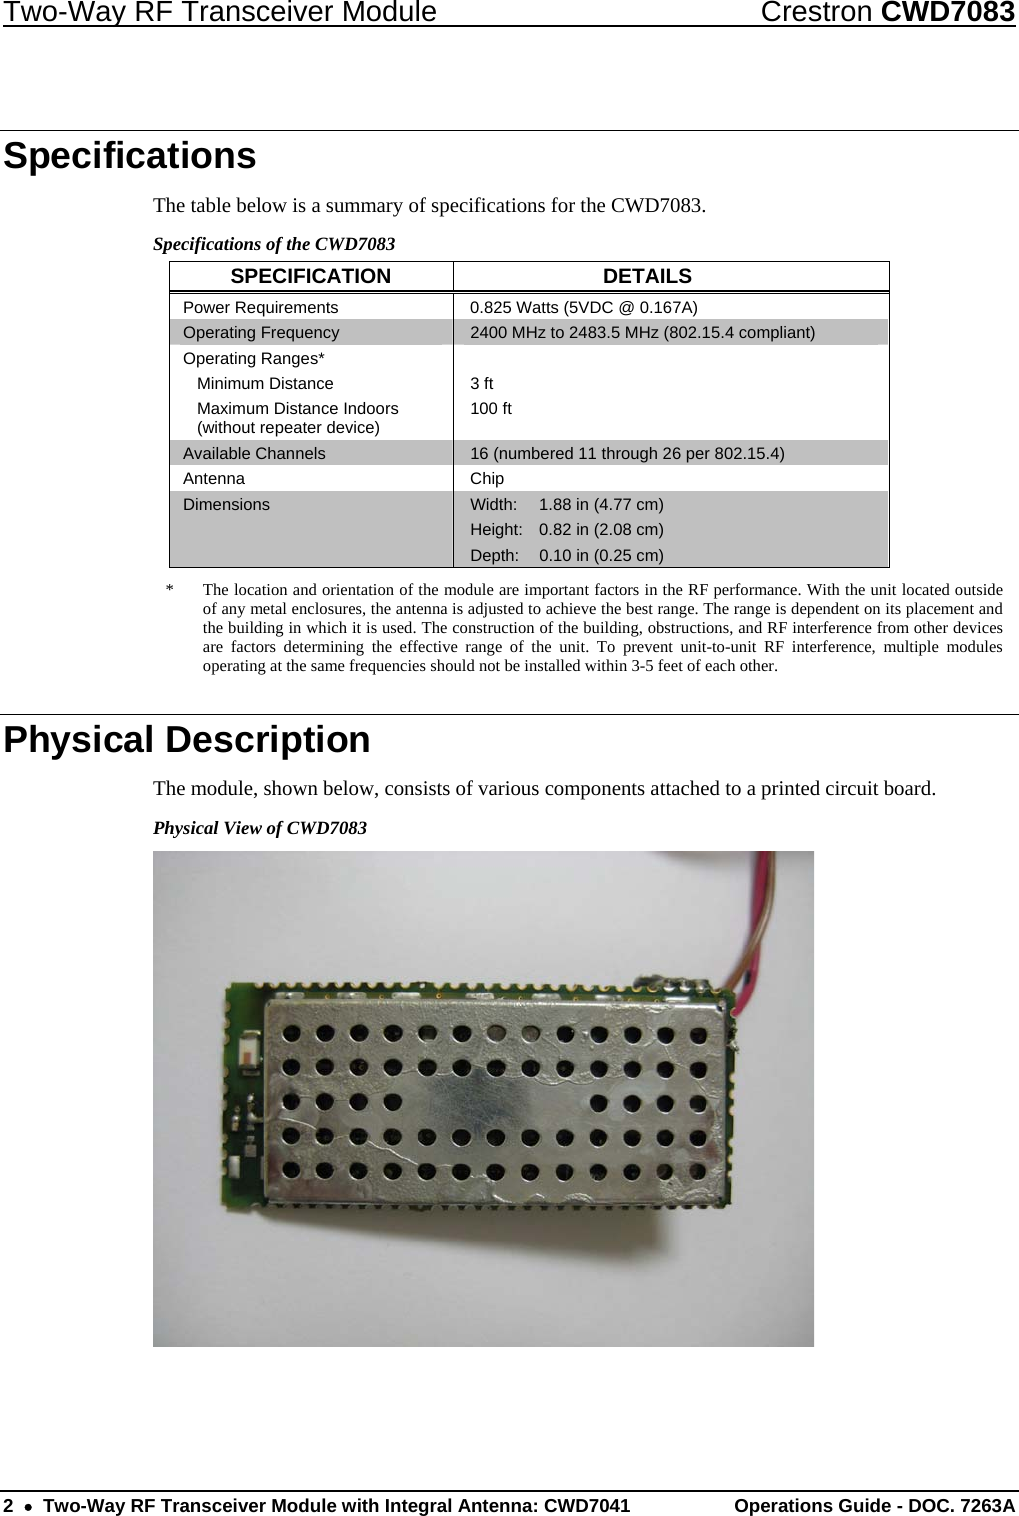 Two-Way RF Transceiver Module  Crestron CWD7083 2    Two-Way RF Transceiver Module with Integral Antenna: CWD7041  Operations Guide - DOC. 7263A   Specifications The table below is a summary of specifications for the CWD7083.  Specifications of the CWD7083 SPECIFICATION DETAILS Power Requirements   0.825 Watts (5VDC @ 0.167A) Operating Frequency   2400 MHz to 2483.5 MHz (802.15.4 compliant) Operating Ranges*  Minimum Distance   Maximum Distance Indoors    (without repeater device)  3 ft 100 ft Available Channels   16 (numbered 11 through 26 per 802.15.4)   Antenna Chip Dimensions  Width:  1.88 in (4.77 cm) Height:  0.82 in (2.08 cm) Depth:  0.10 in (0.25 cm) *  The location and orientation of the module are important factors in the RF performance. With the unit located outside of any metal enclosures, the antenna is adjusted to achieve the best range. The range is dependent on its placement and the building in which it is used. The construction of the building, obstructions, and RF interference from other devices are factors determining the effective range of the unit. To prevent unit-to-unit RF interference, multiple modules operating at the same frequencies should not be installed within 3-5 feet of each other. Physical Description The module, shown below, consists of various components attached to a printed circuit board.  Physical View of CWD7083   